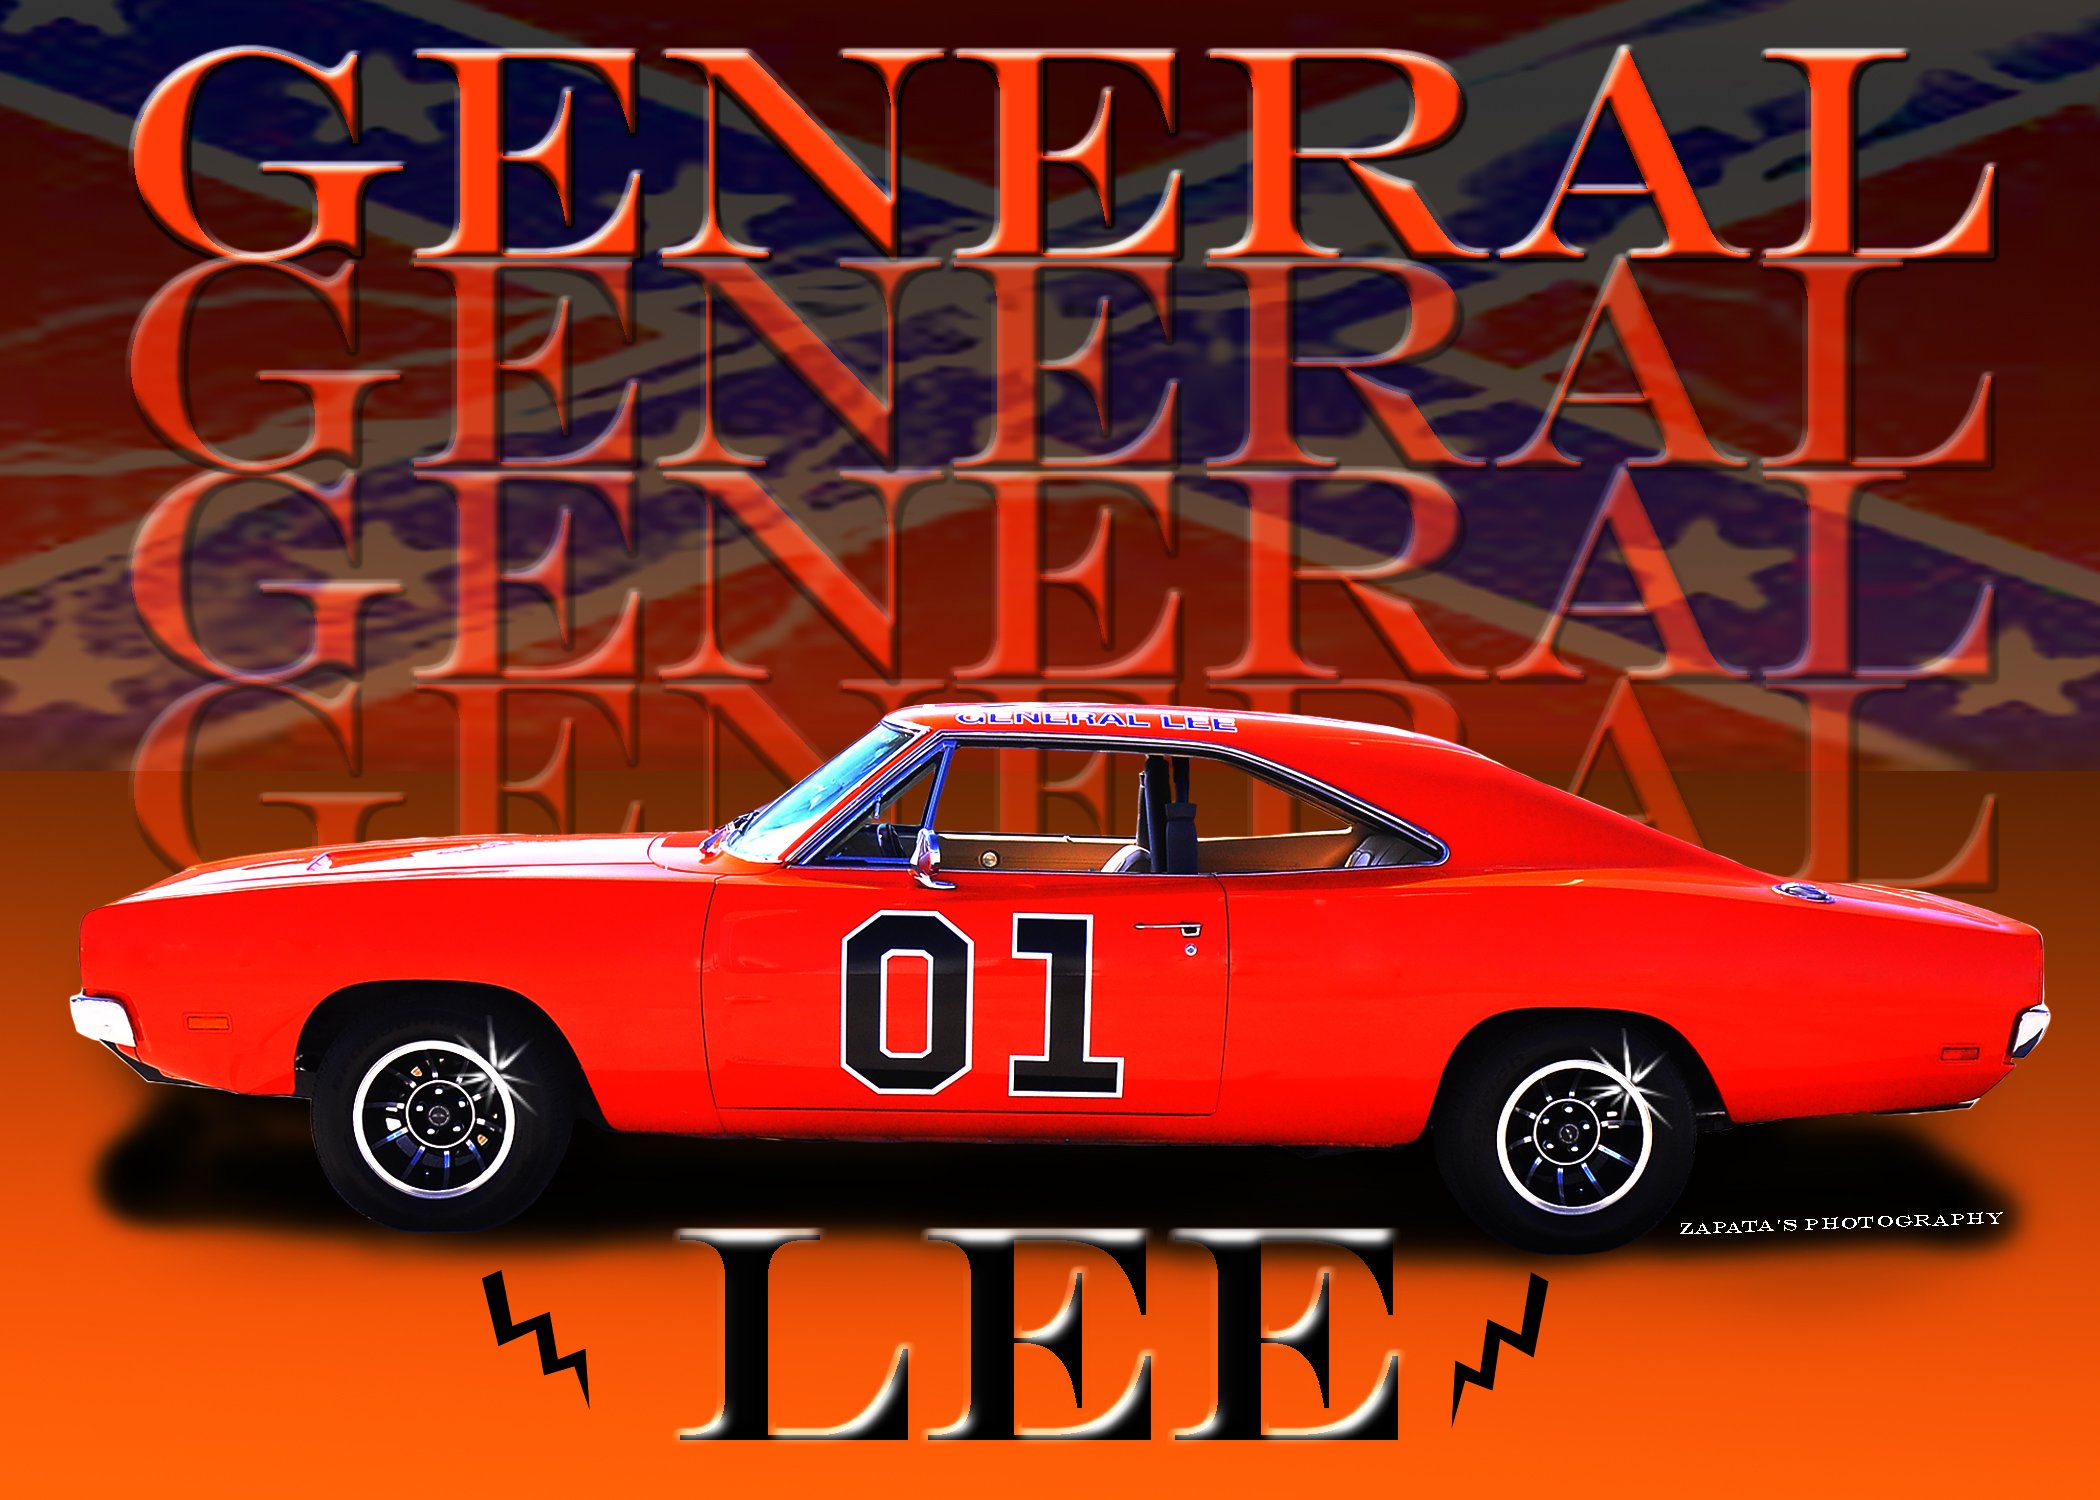 General lee dukes hazzard dodge charger muscle hot rod rods television series poster wallpaper x